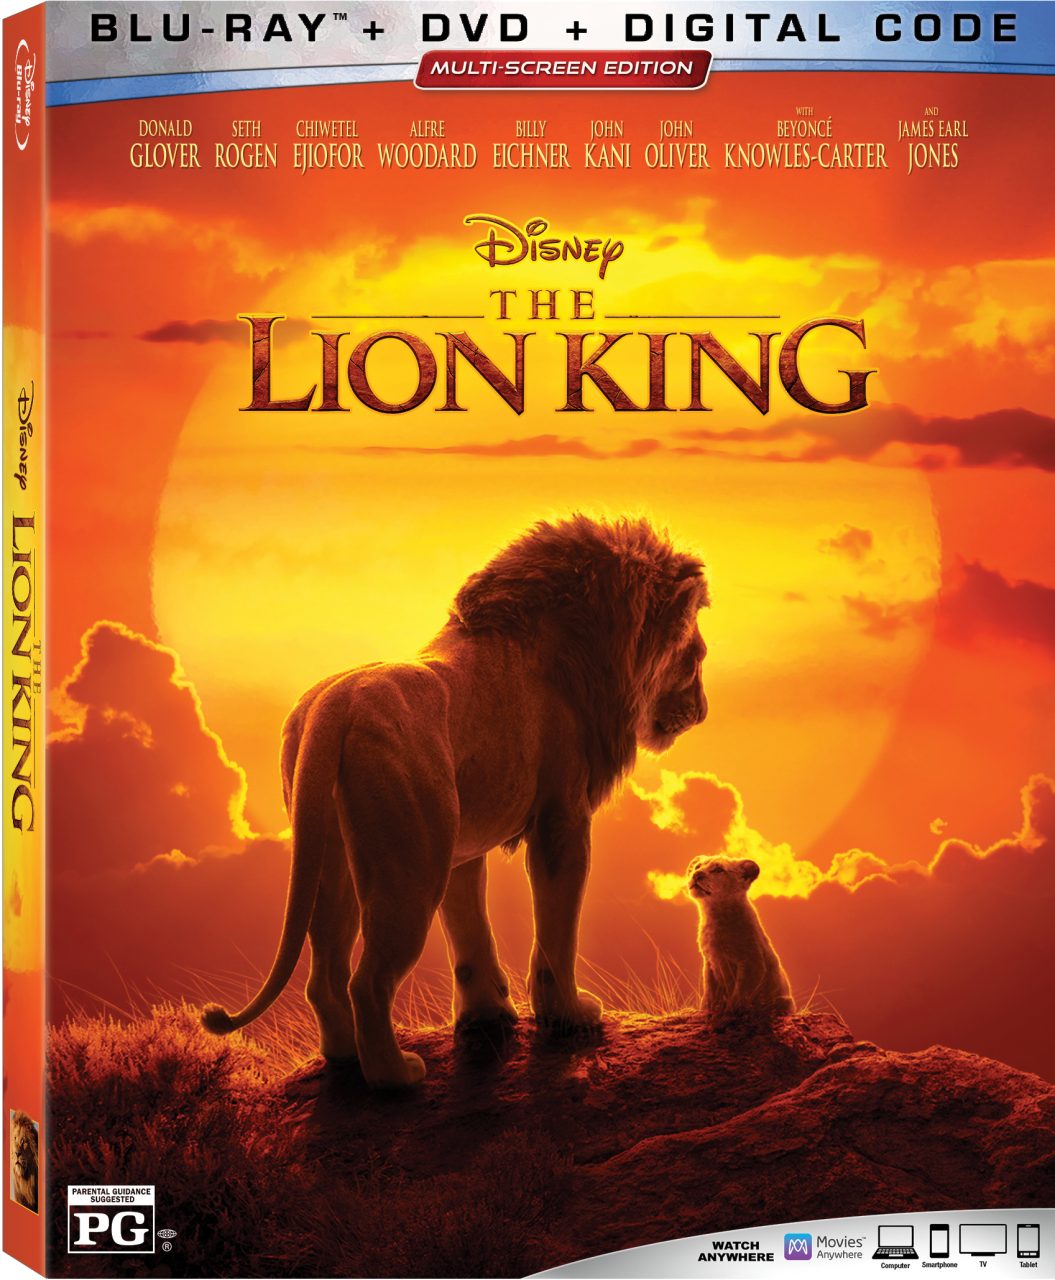 The Lion King Blu-Ray Combo Pack cover (Walt Disney Studios Home Entertainment)